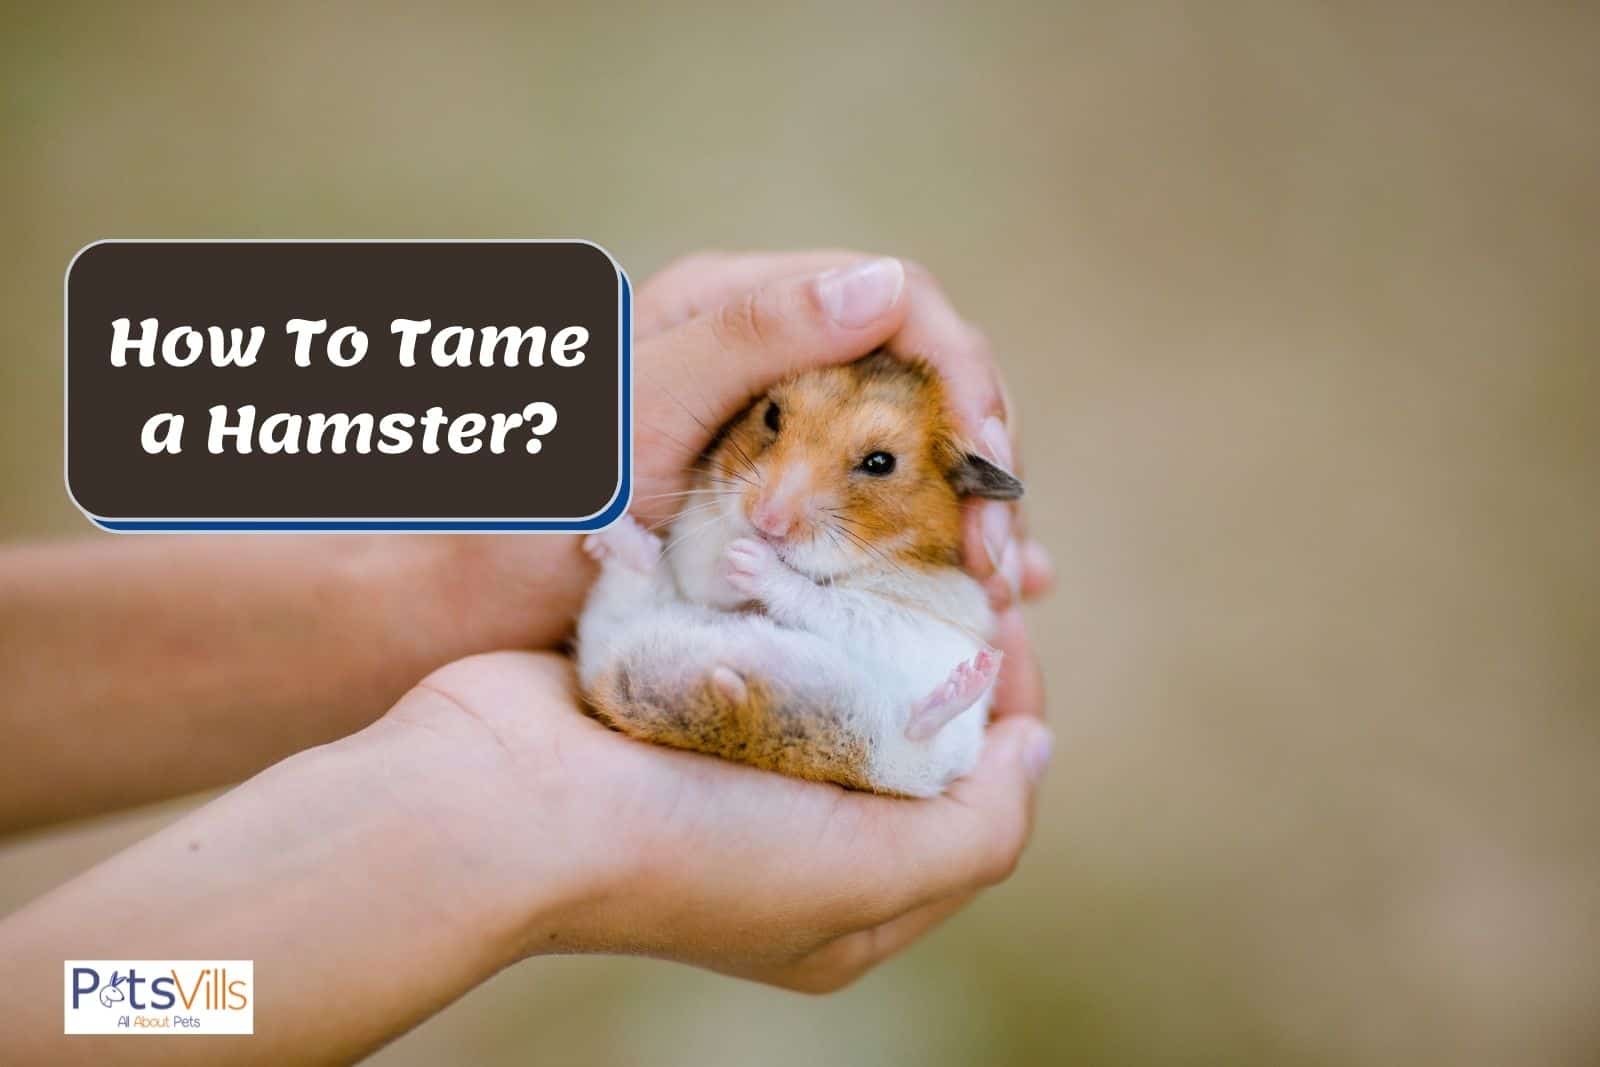 7. Taming a hamster takes time and patience, and it's important to go at their pace.